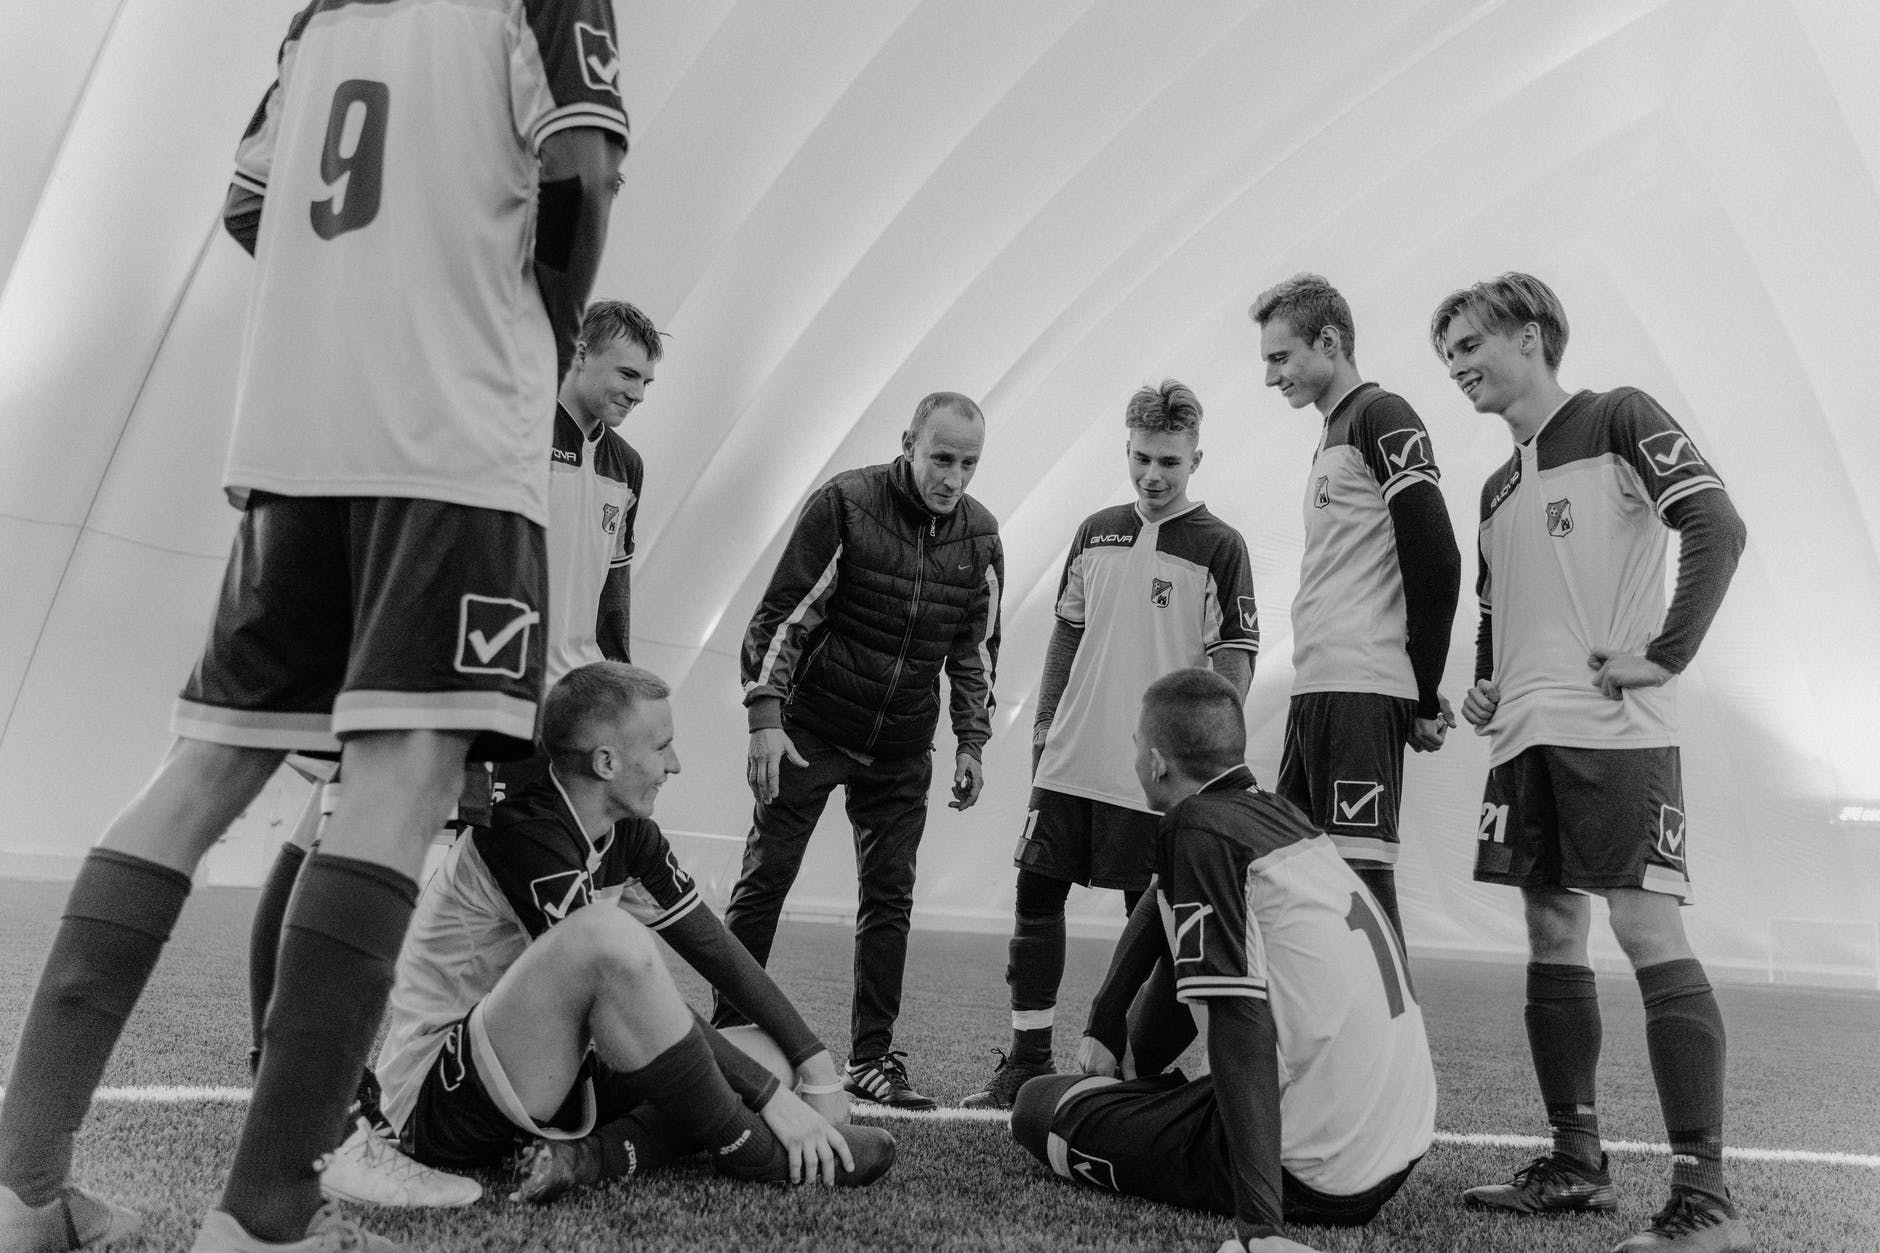 grayscale photo of men in soccer jersey